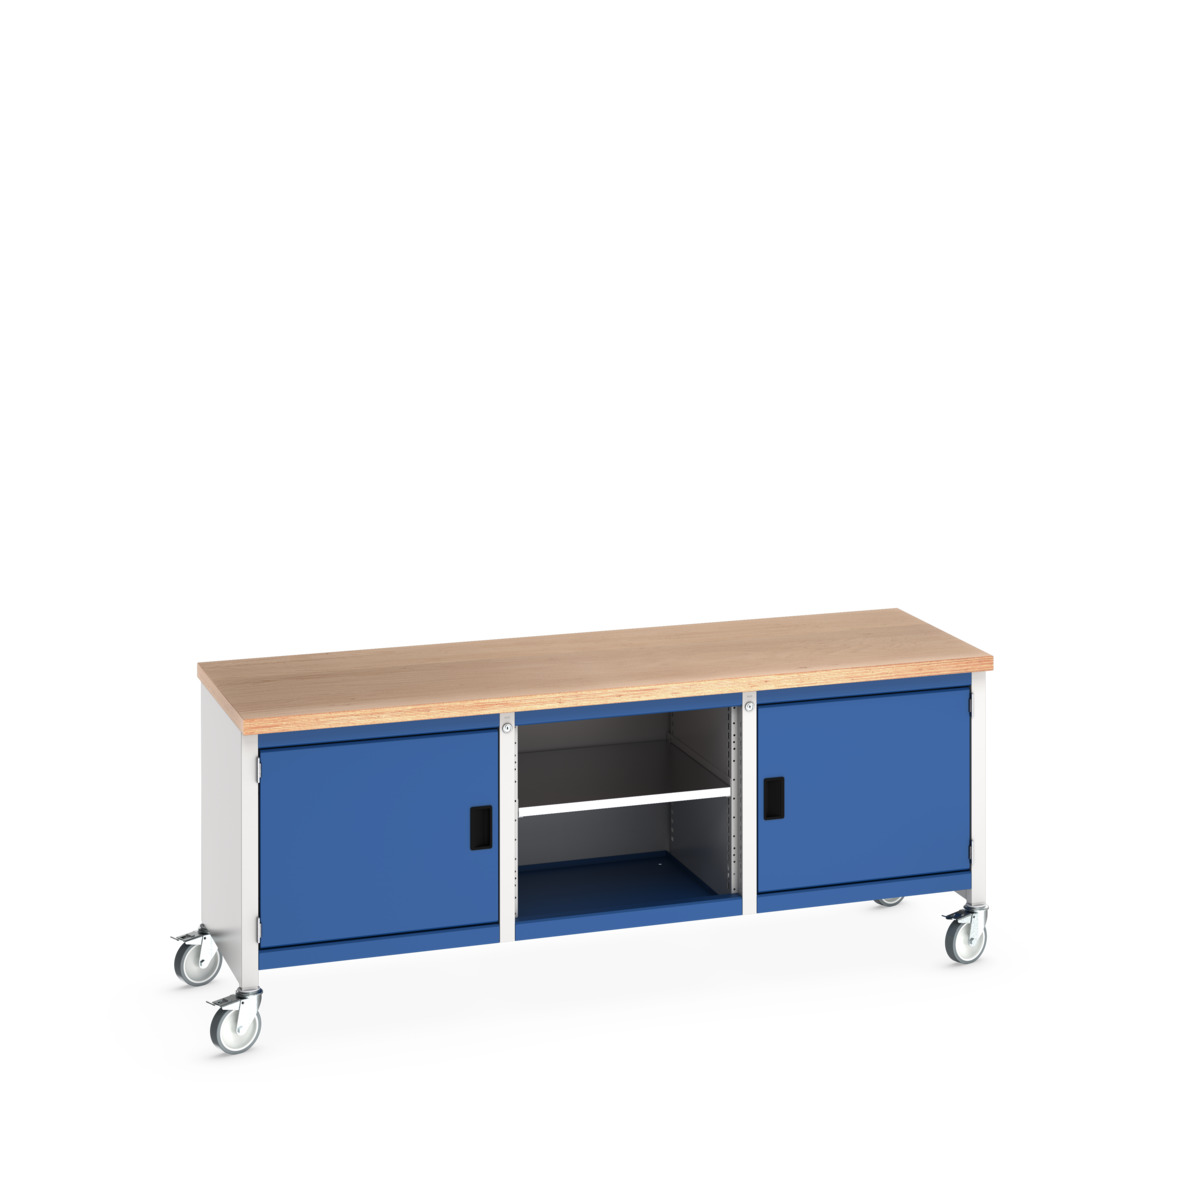 41002118.11V - cubio mobile storage bench (mpx)